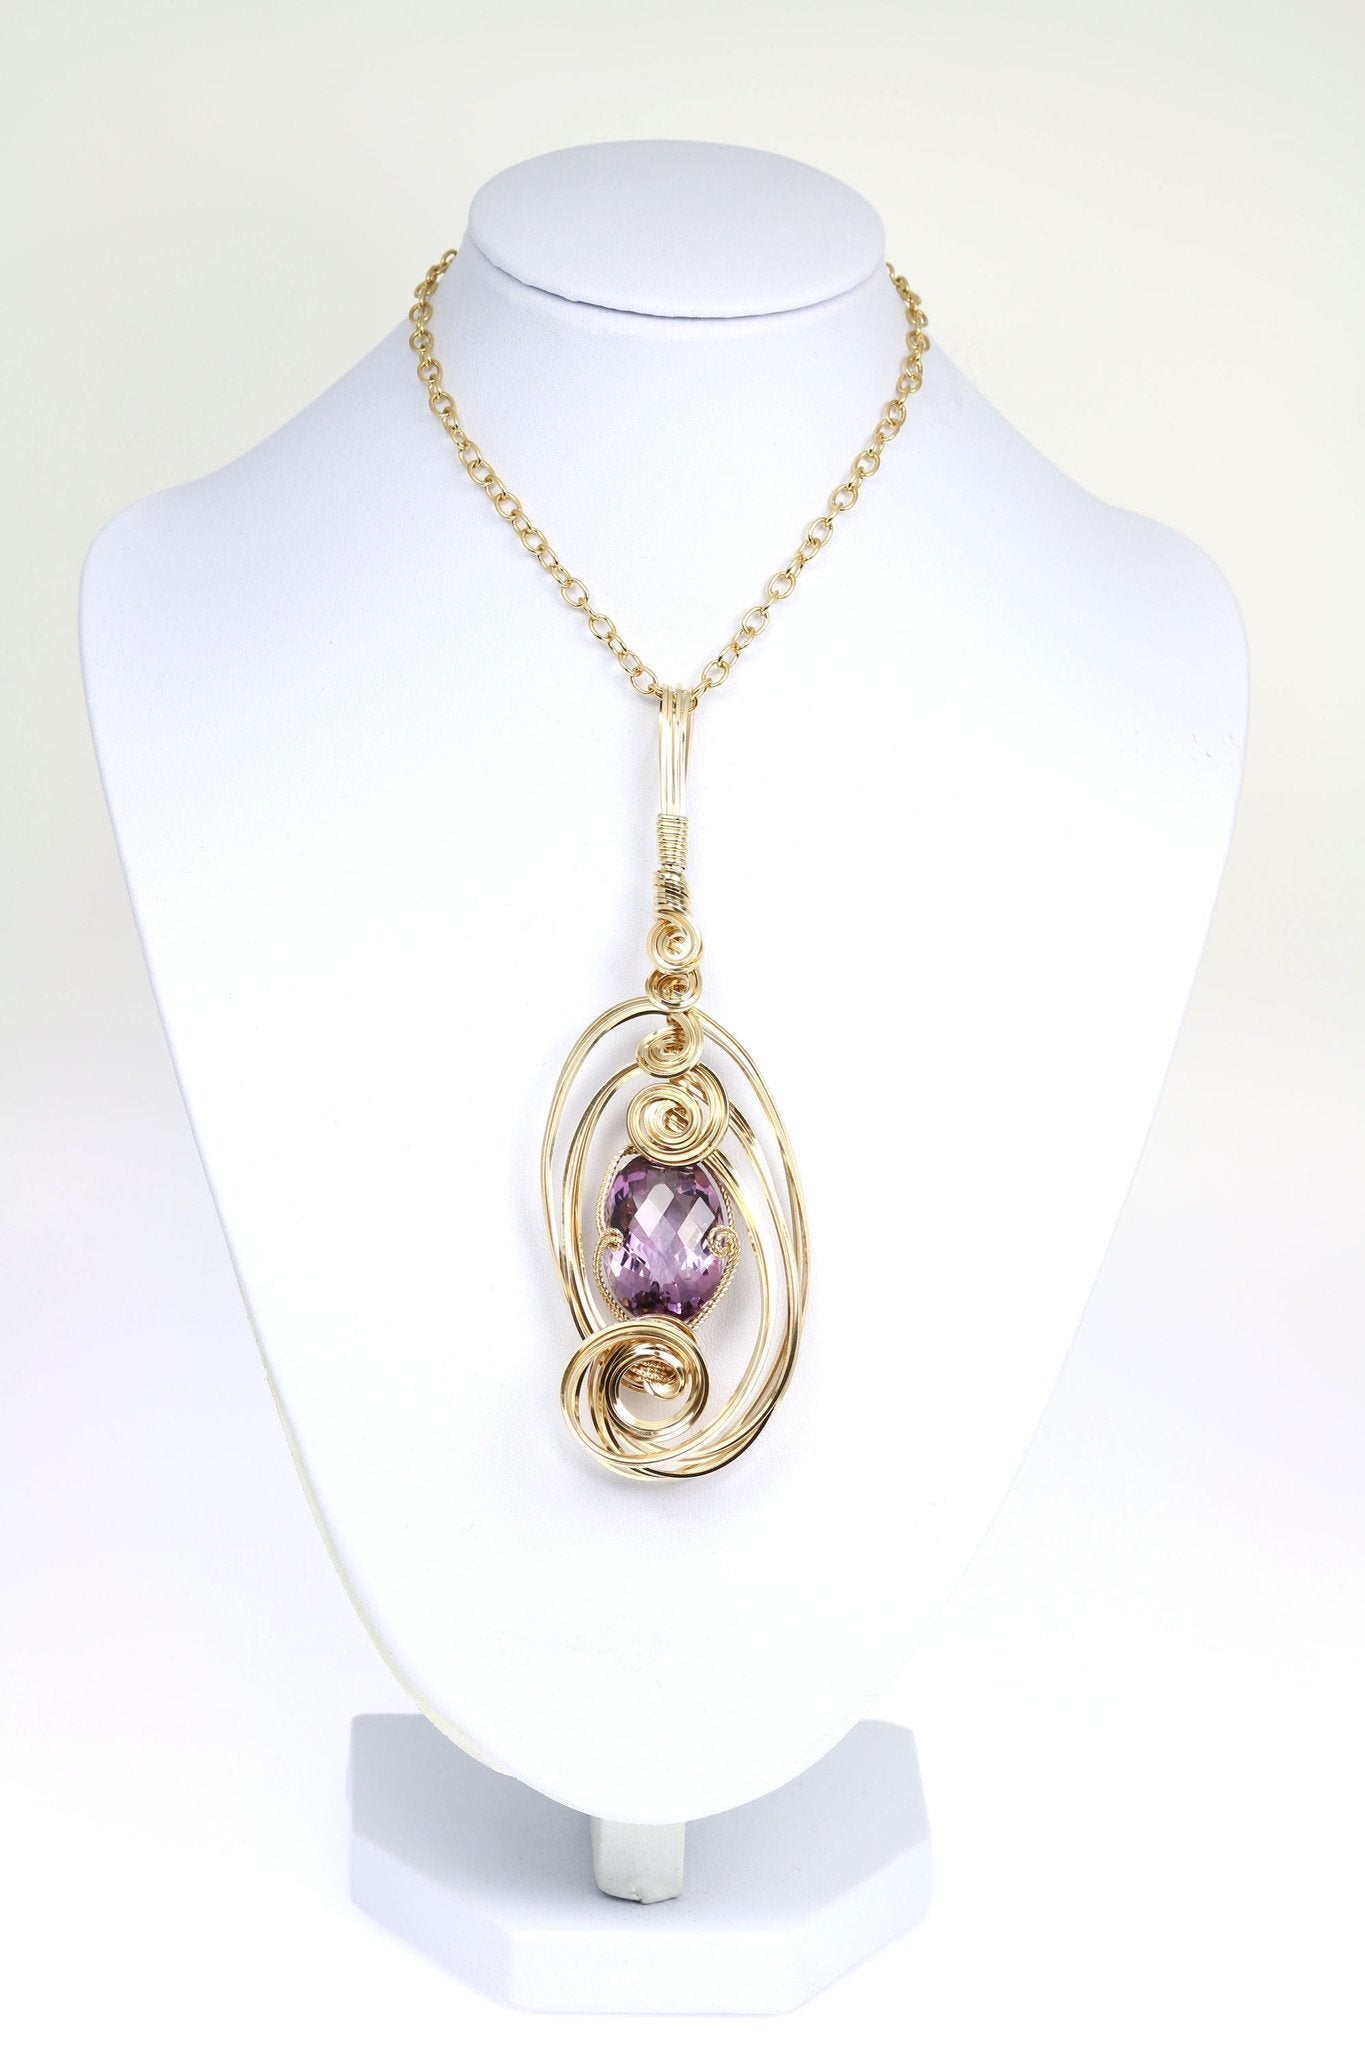 25.5 Ct Amethyst 14K Gold-filled Pendant on Chain